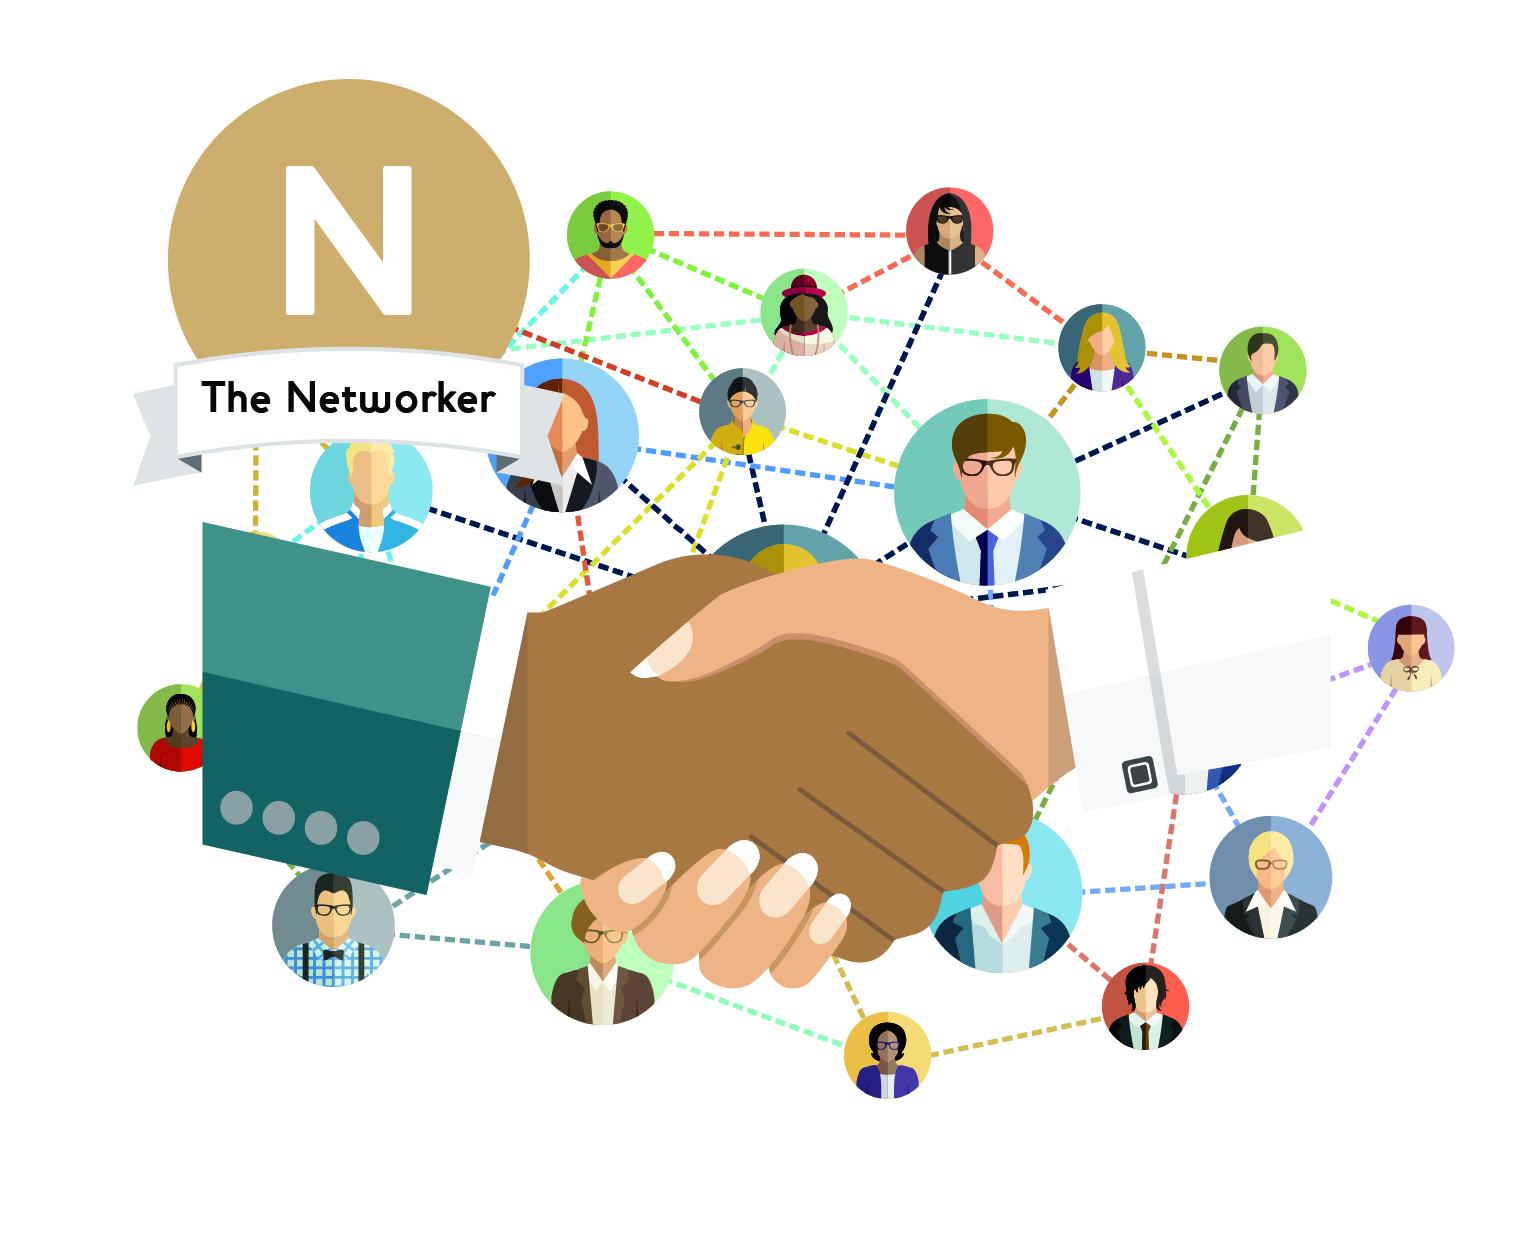 are you a natural networker?